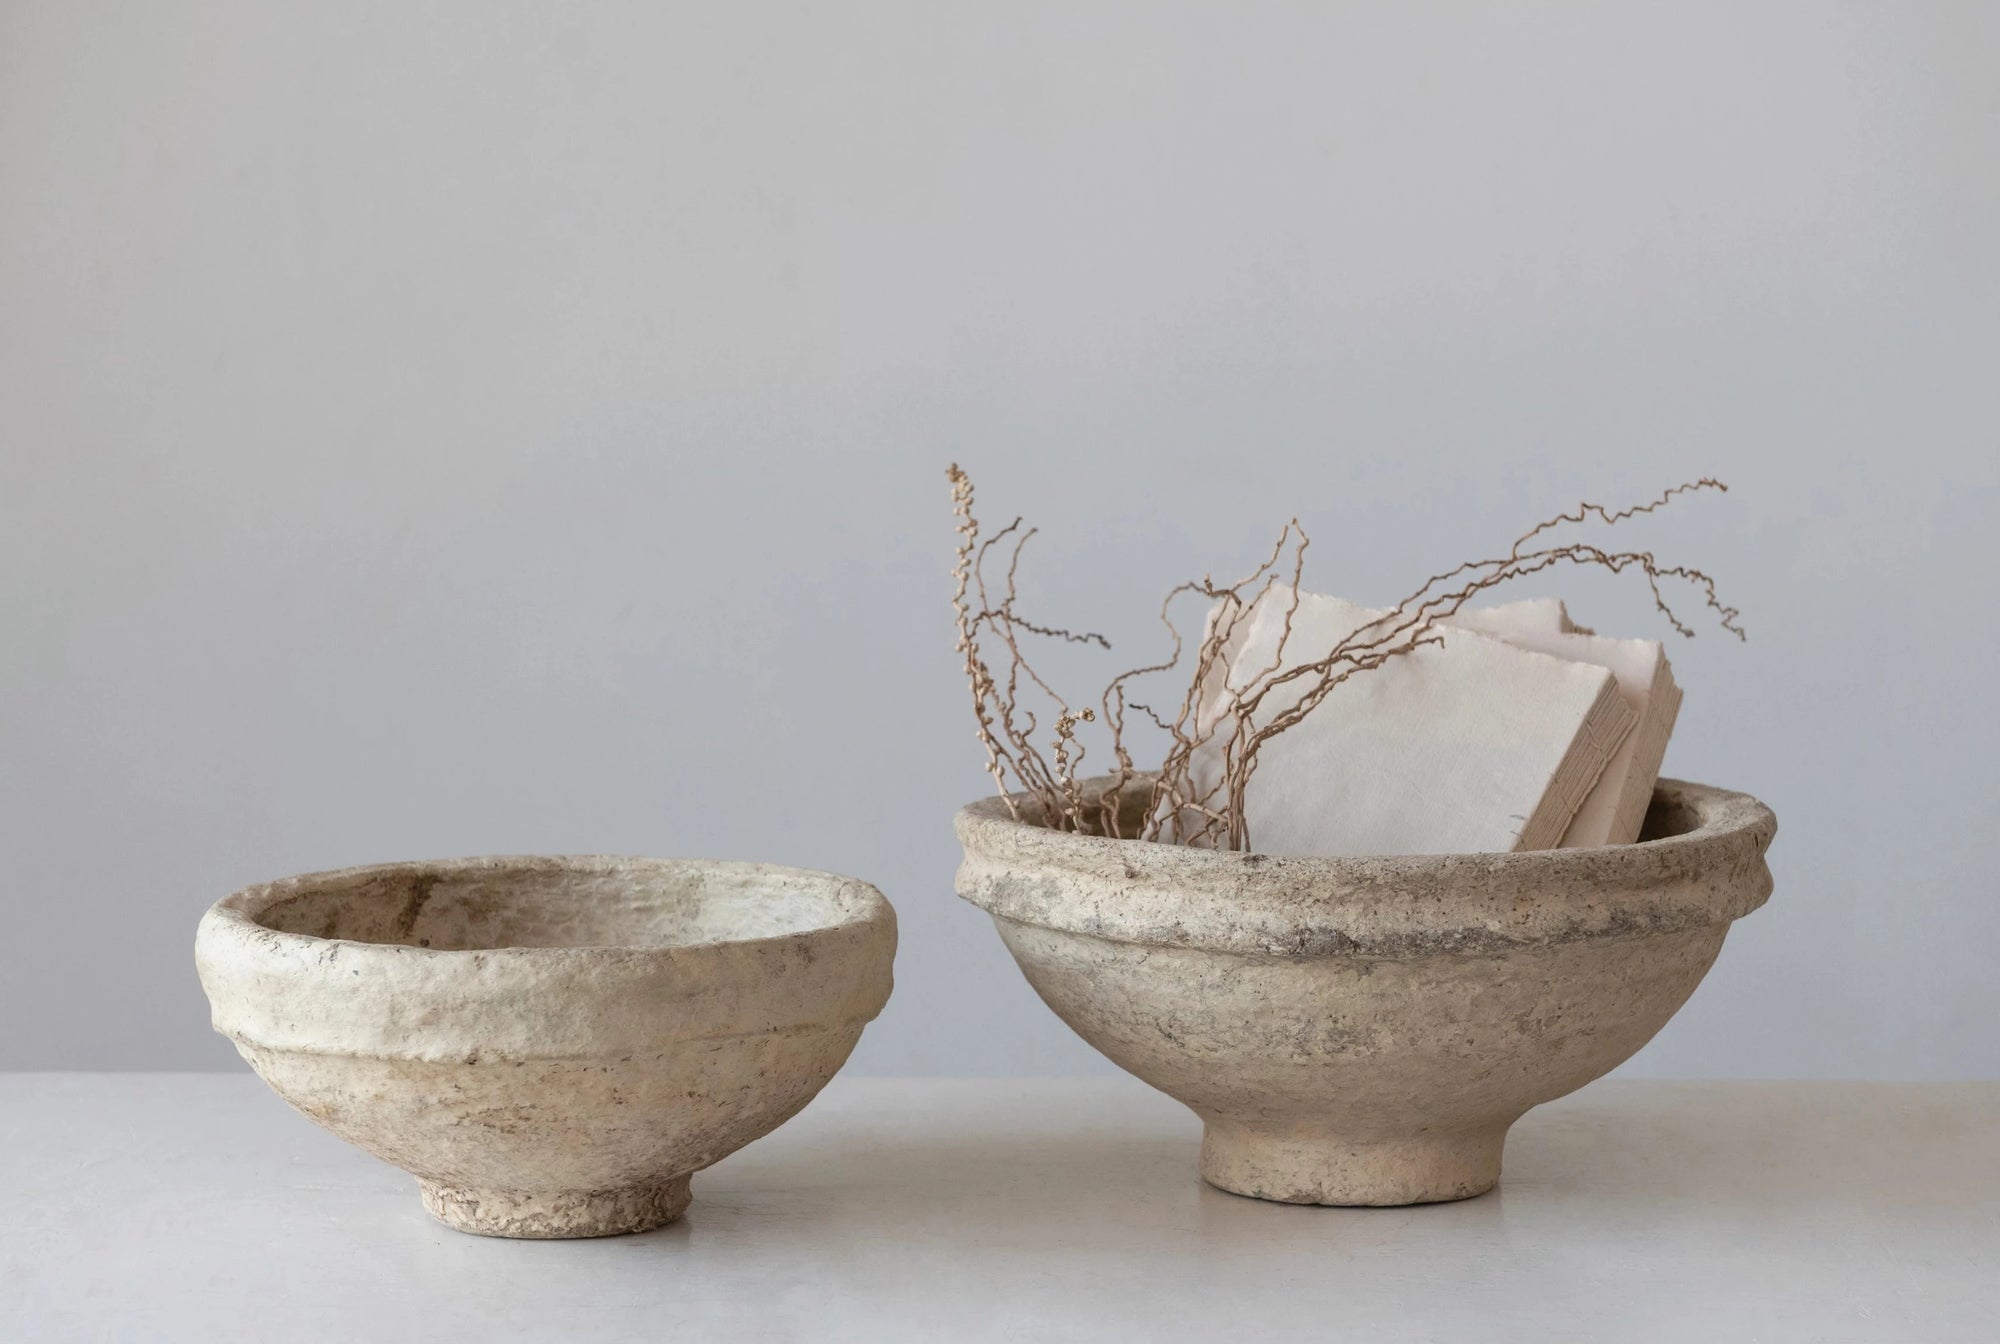 recycled paper mache decorative bowls